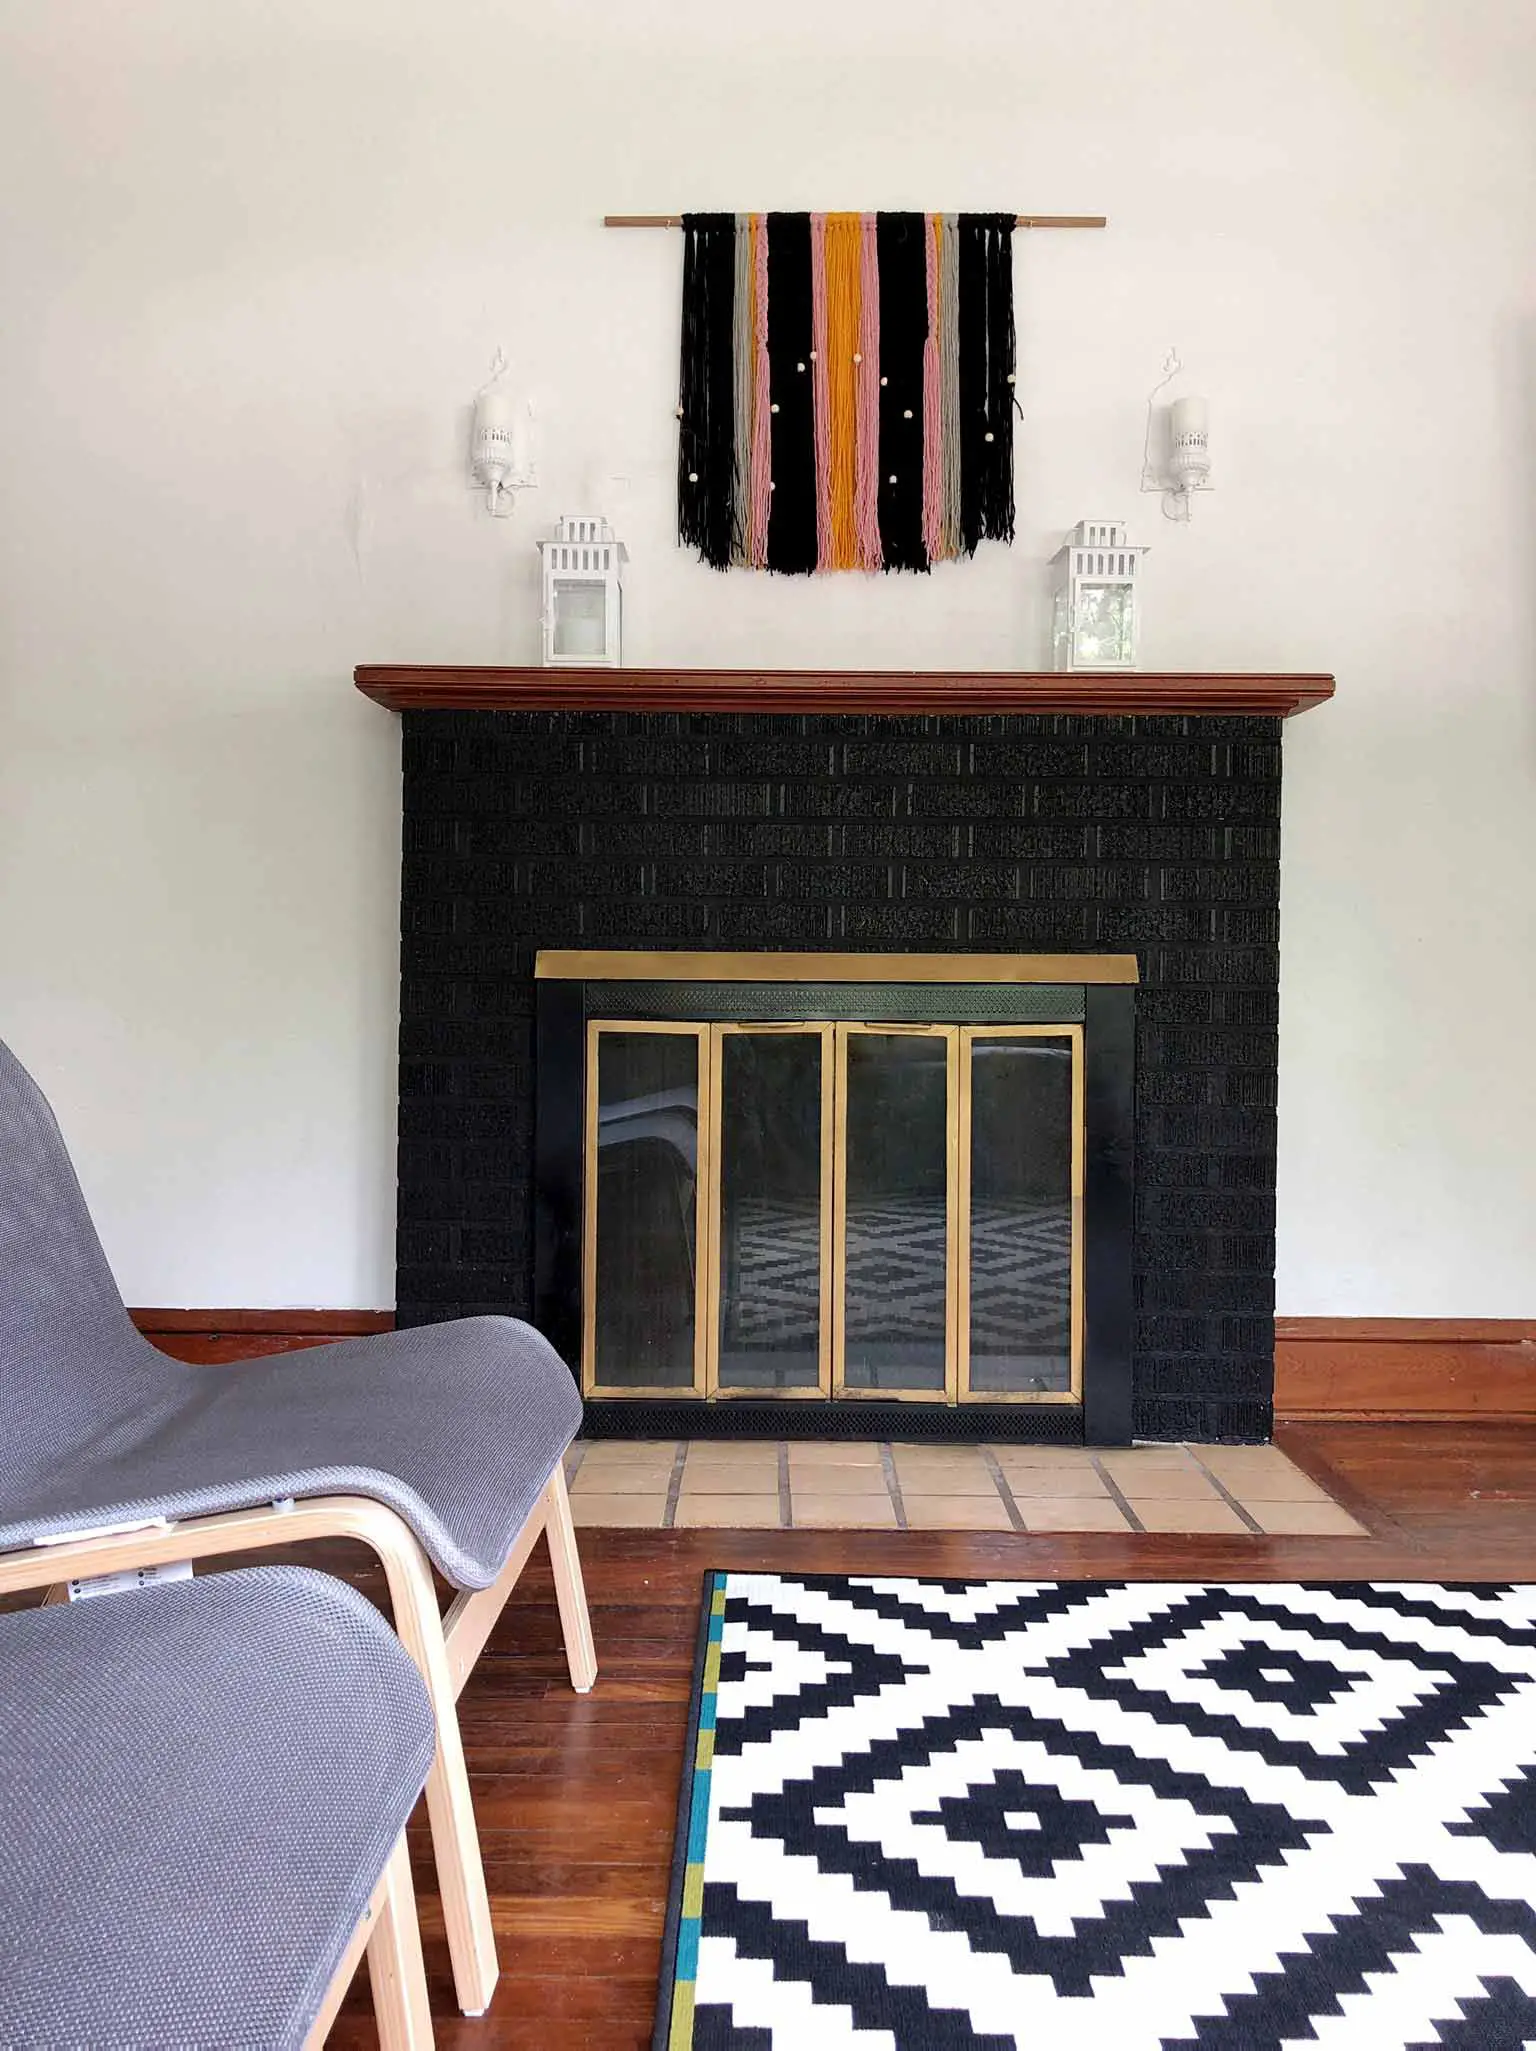 Painted brick fireplace - Modern minimalist room makeover on a budget - That Homebird Life Blog